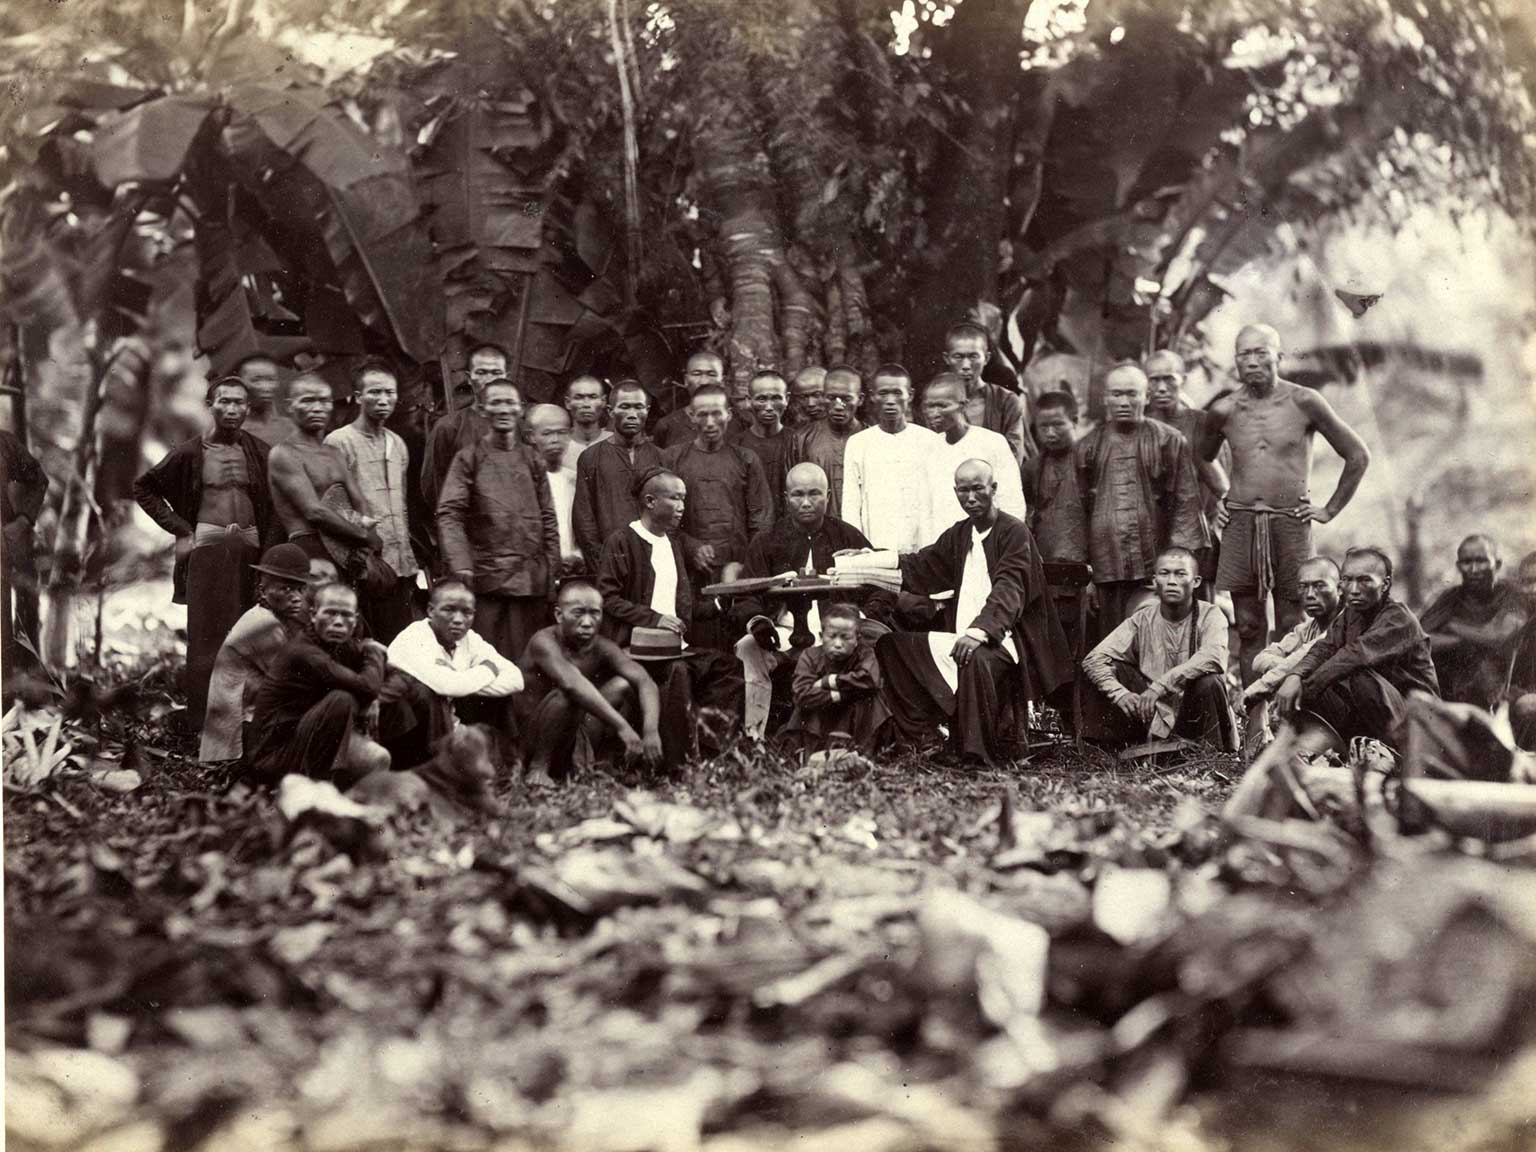 Chinese coolies and overseers in Sumatra in 1870, photo collection Deli Company